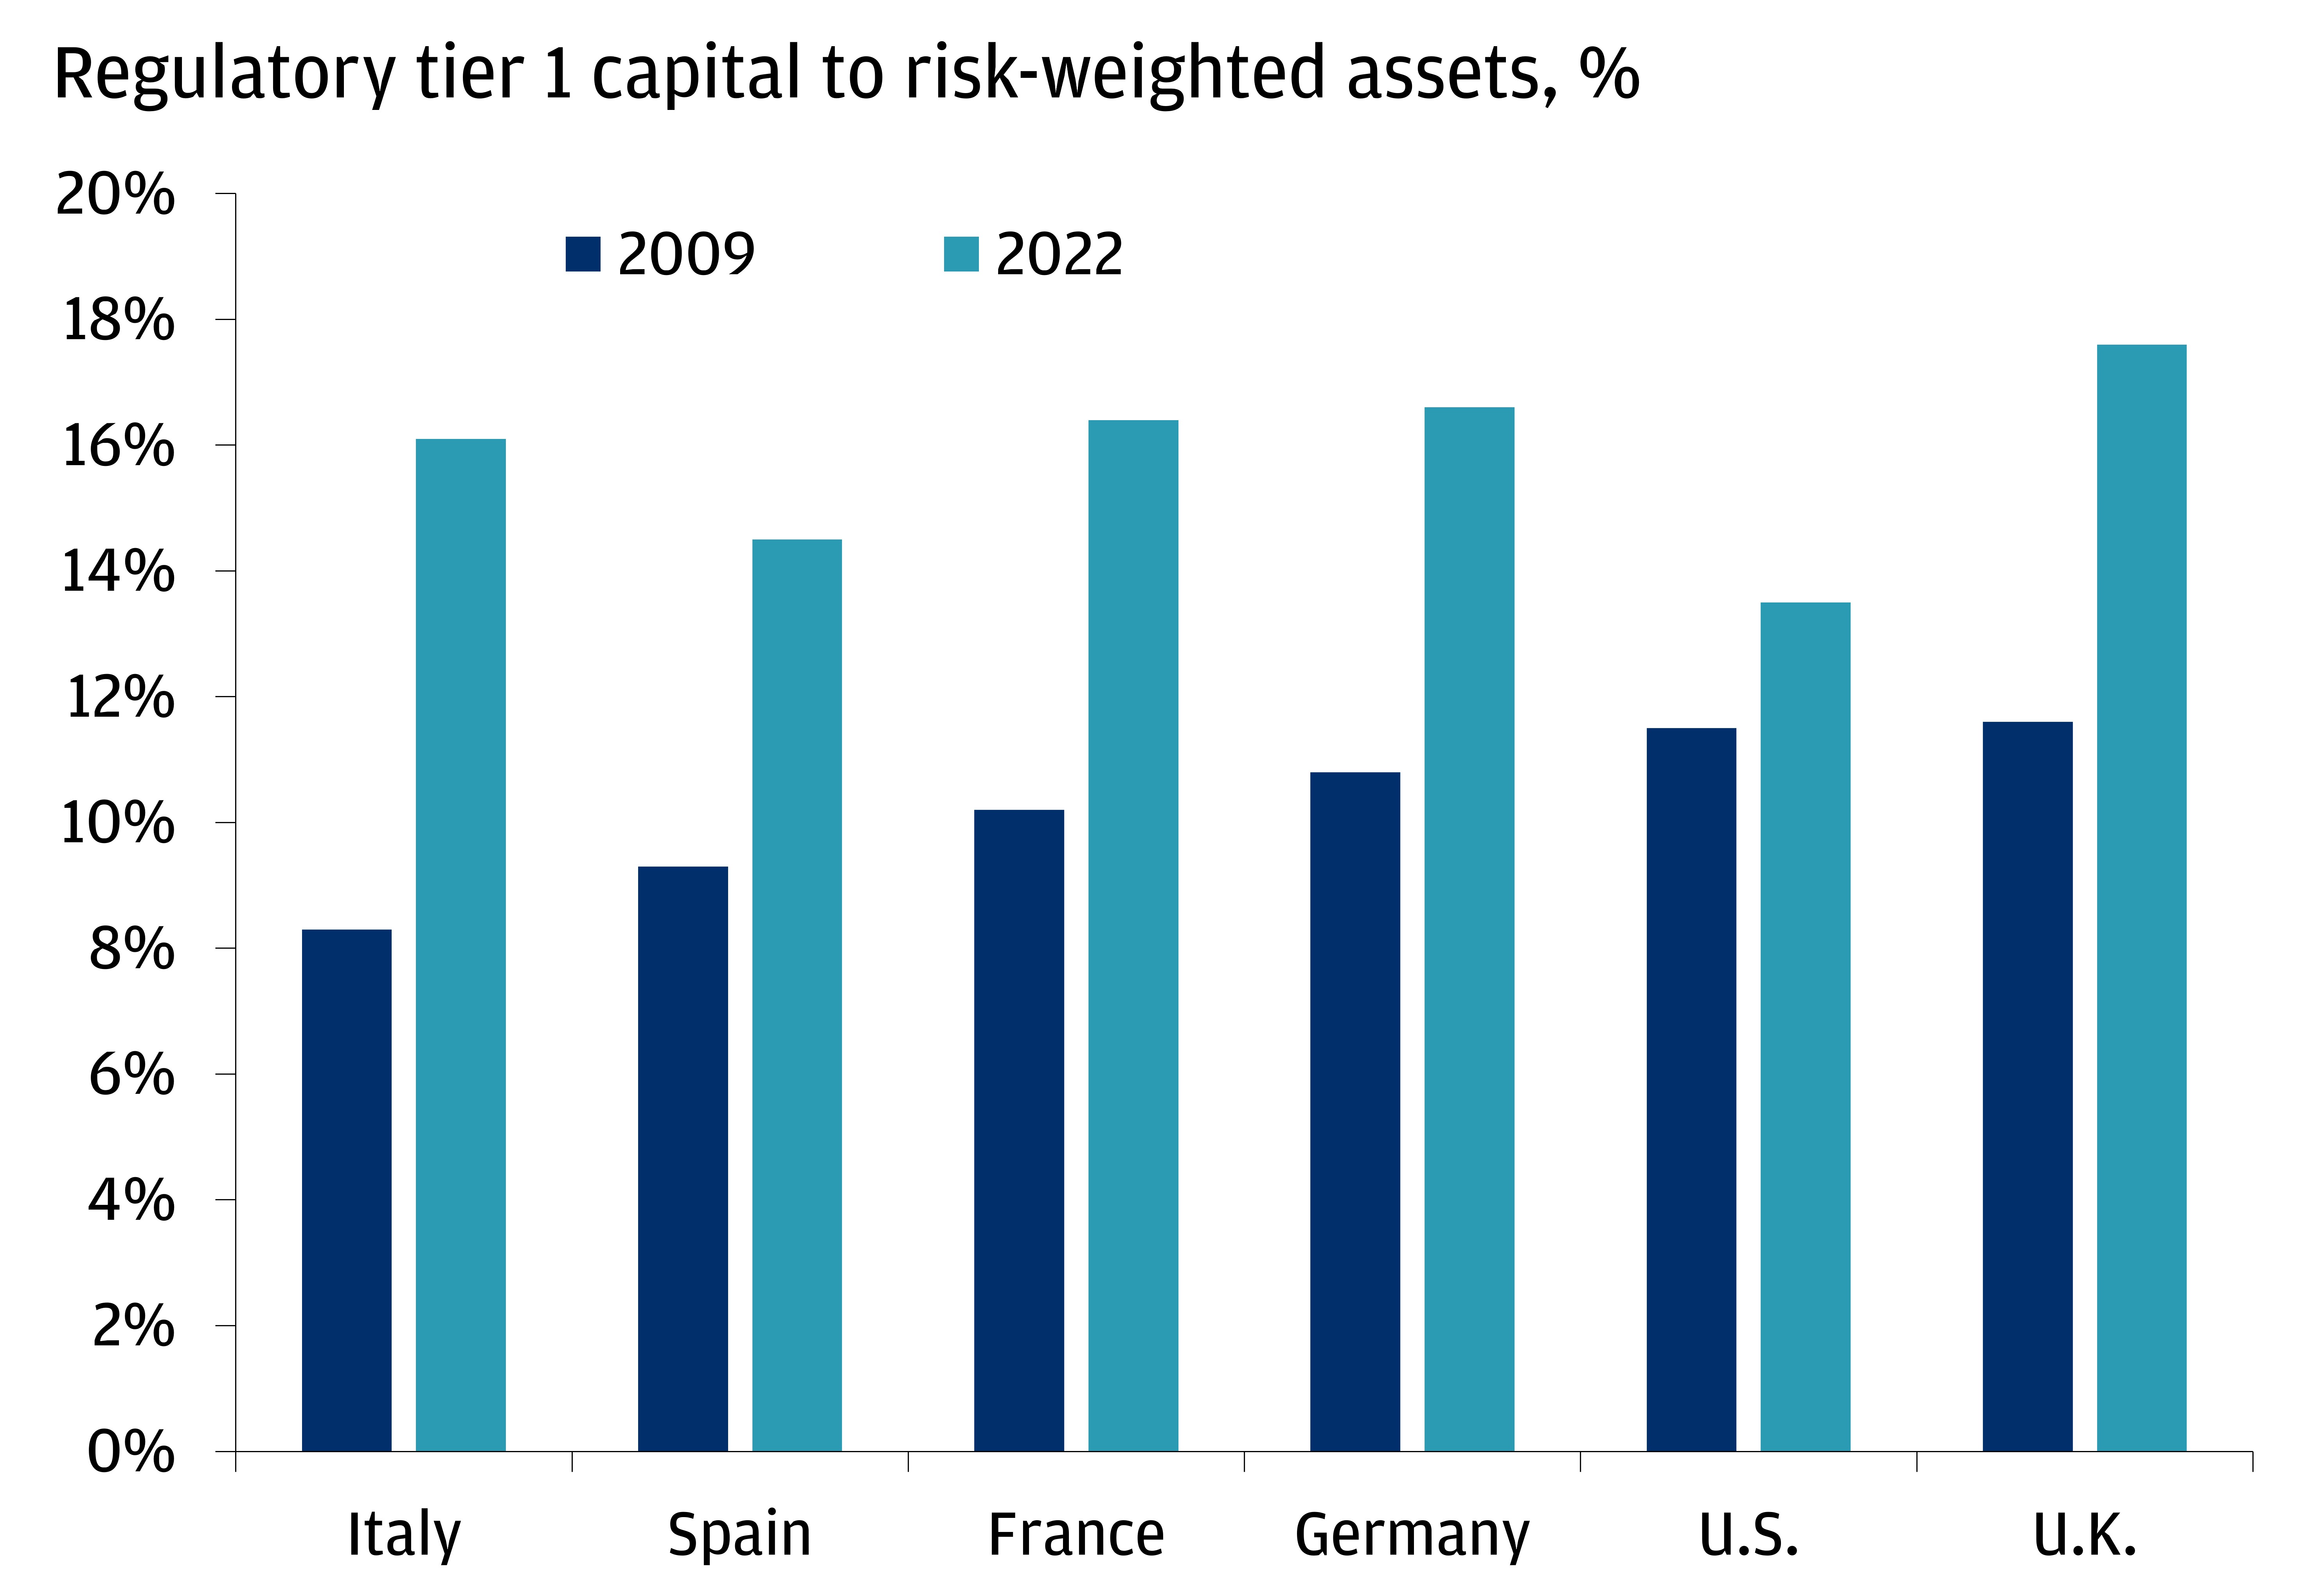 This chart shows regulatory Tier 1 capital to risk-weighted assets (%) in 2009 and 2022 by country.